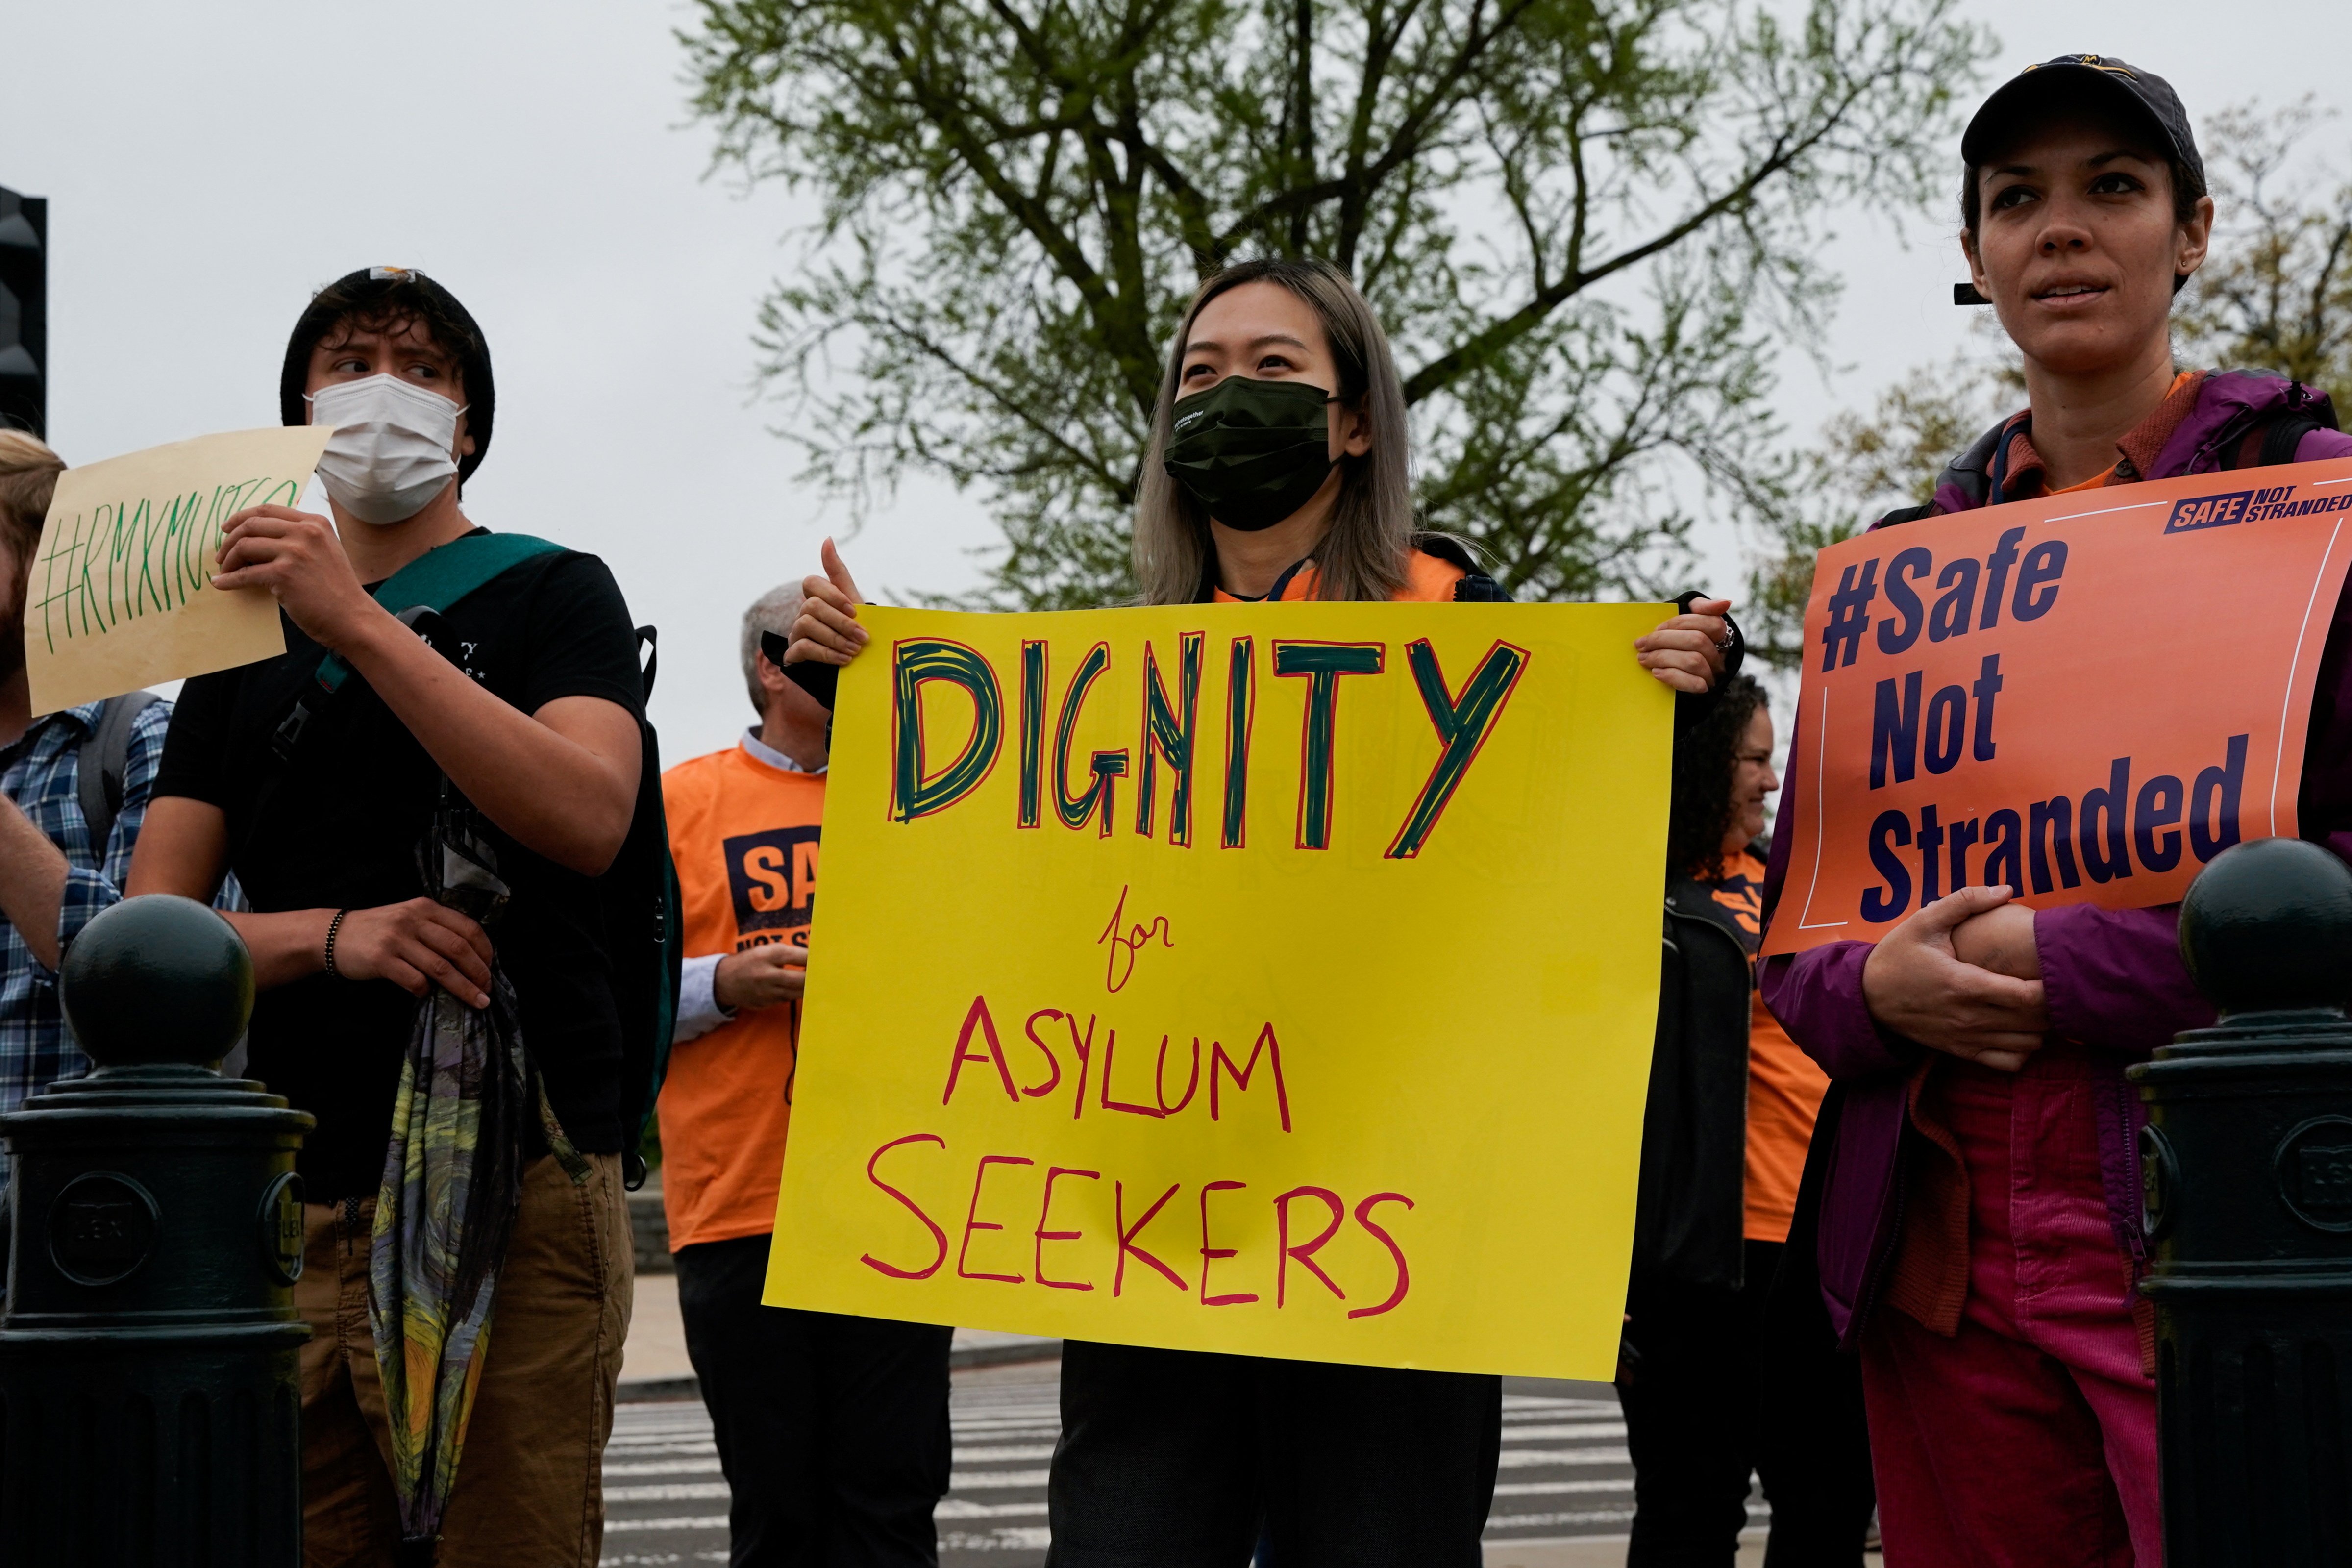 People in support of asylum seekers rally near the Supreme Court in Washington April 26, 2022. (CNS photo/Elizabeth Frantz, Reuters)